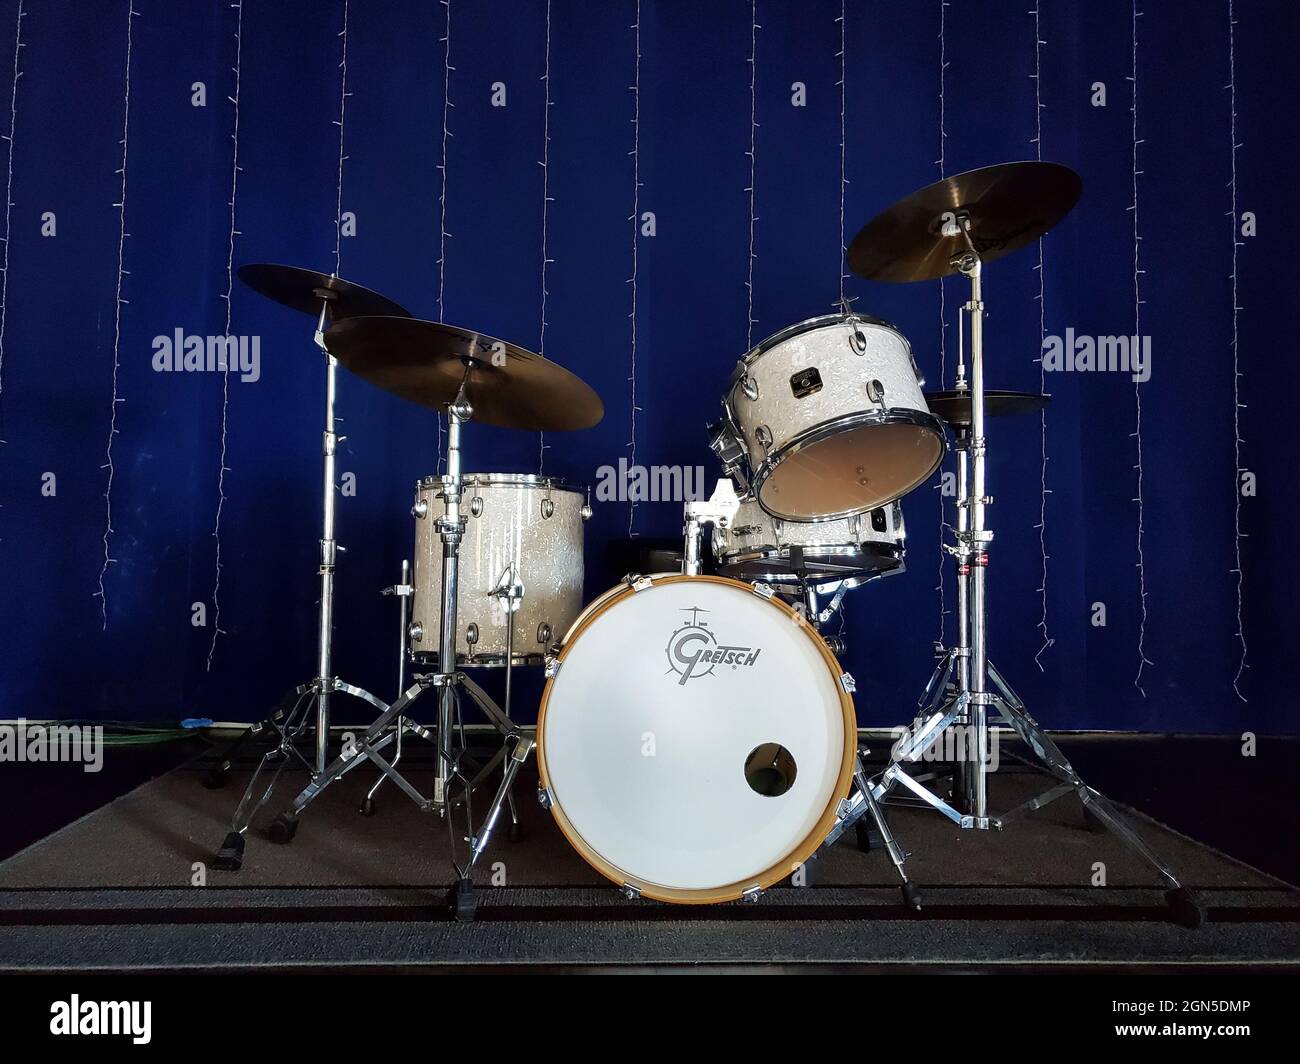 Gretsch drum set on the stage in the 100 Men D.B.A. Hall, a blues trail and Chitlin Circuit venue in Bay St. Louis, Mississippi Stock Photo